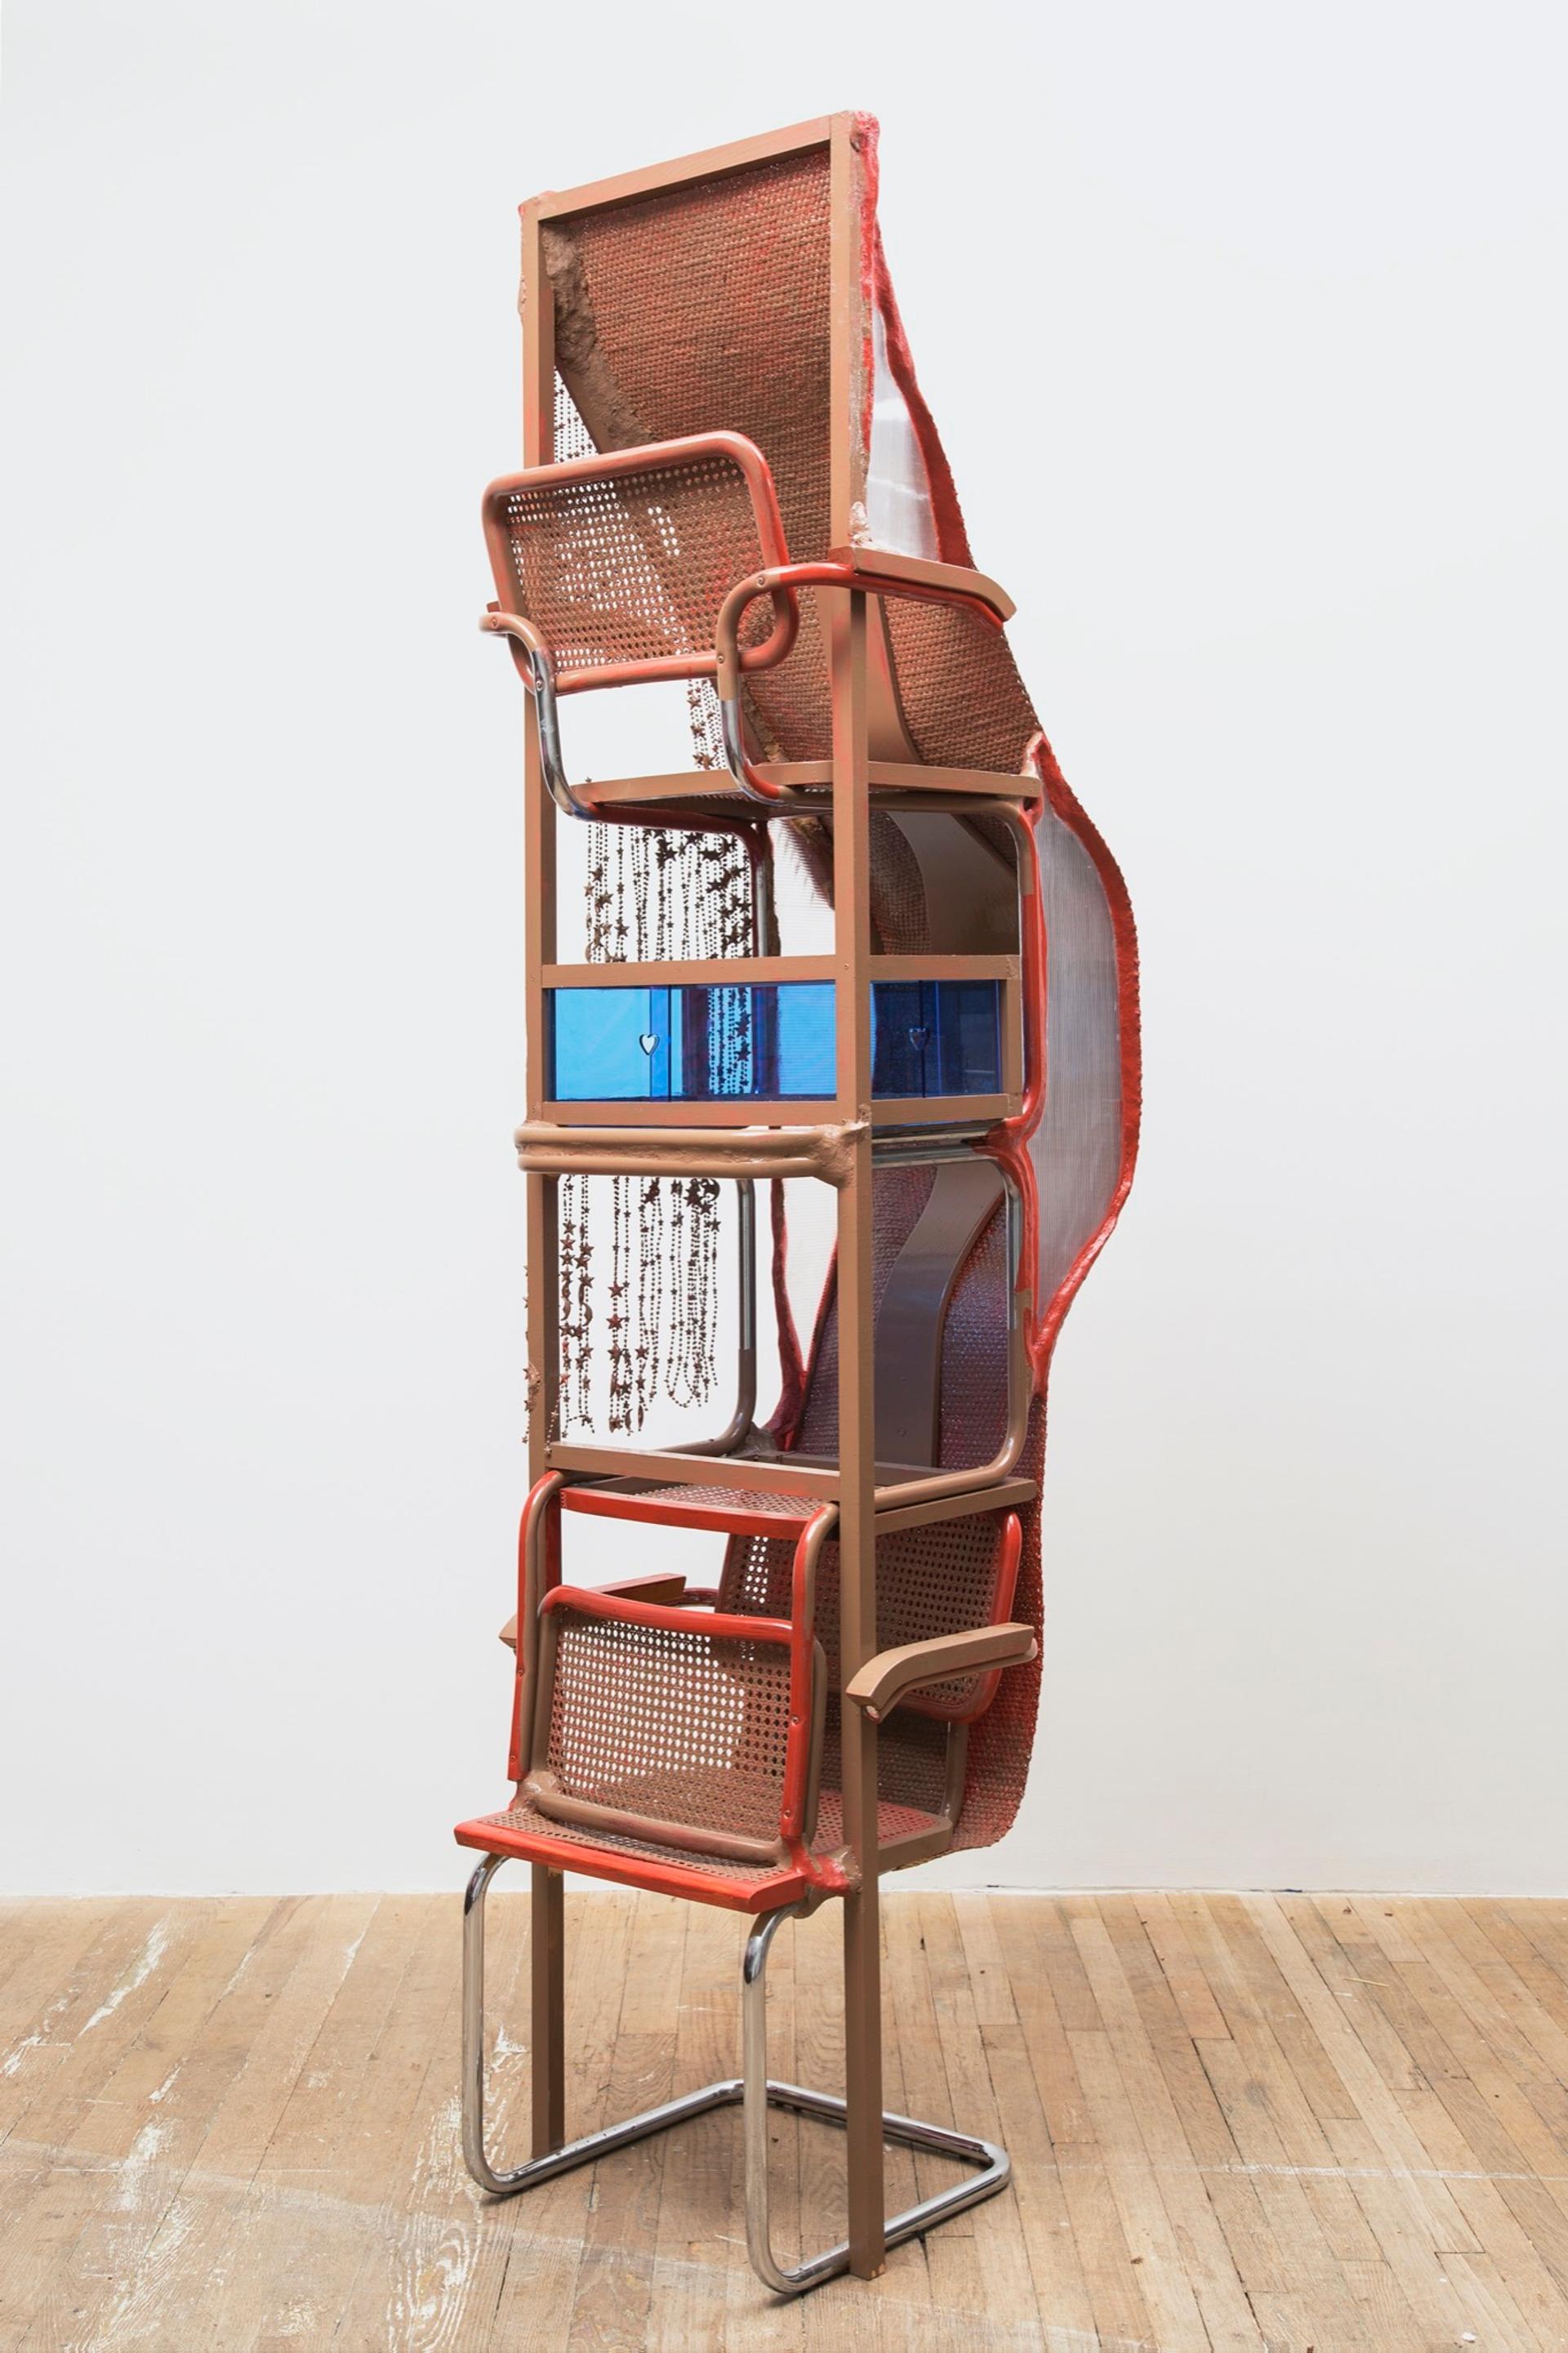 Jessi Reaves, Blue heart shelf, 2019. Wood and metal chairs, woven fabric, plexiglass, paint, plastic, sawdust, wood glue 96 × 21 × 30 in. (243.84 × 53.34 × 76.20 cm) Courtesy the artist and Bridget Donahue, NYC. Photo: Gregory Carideo